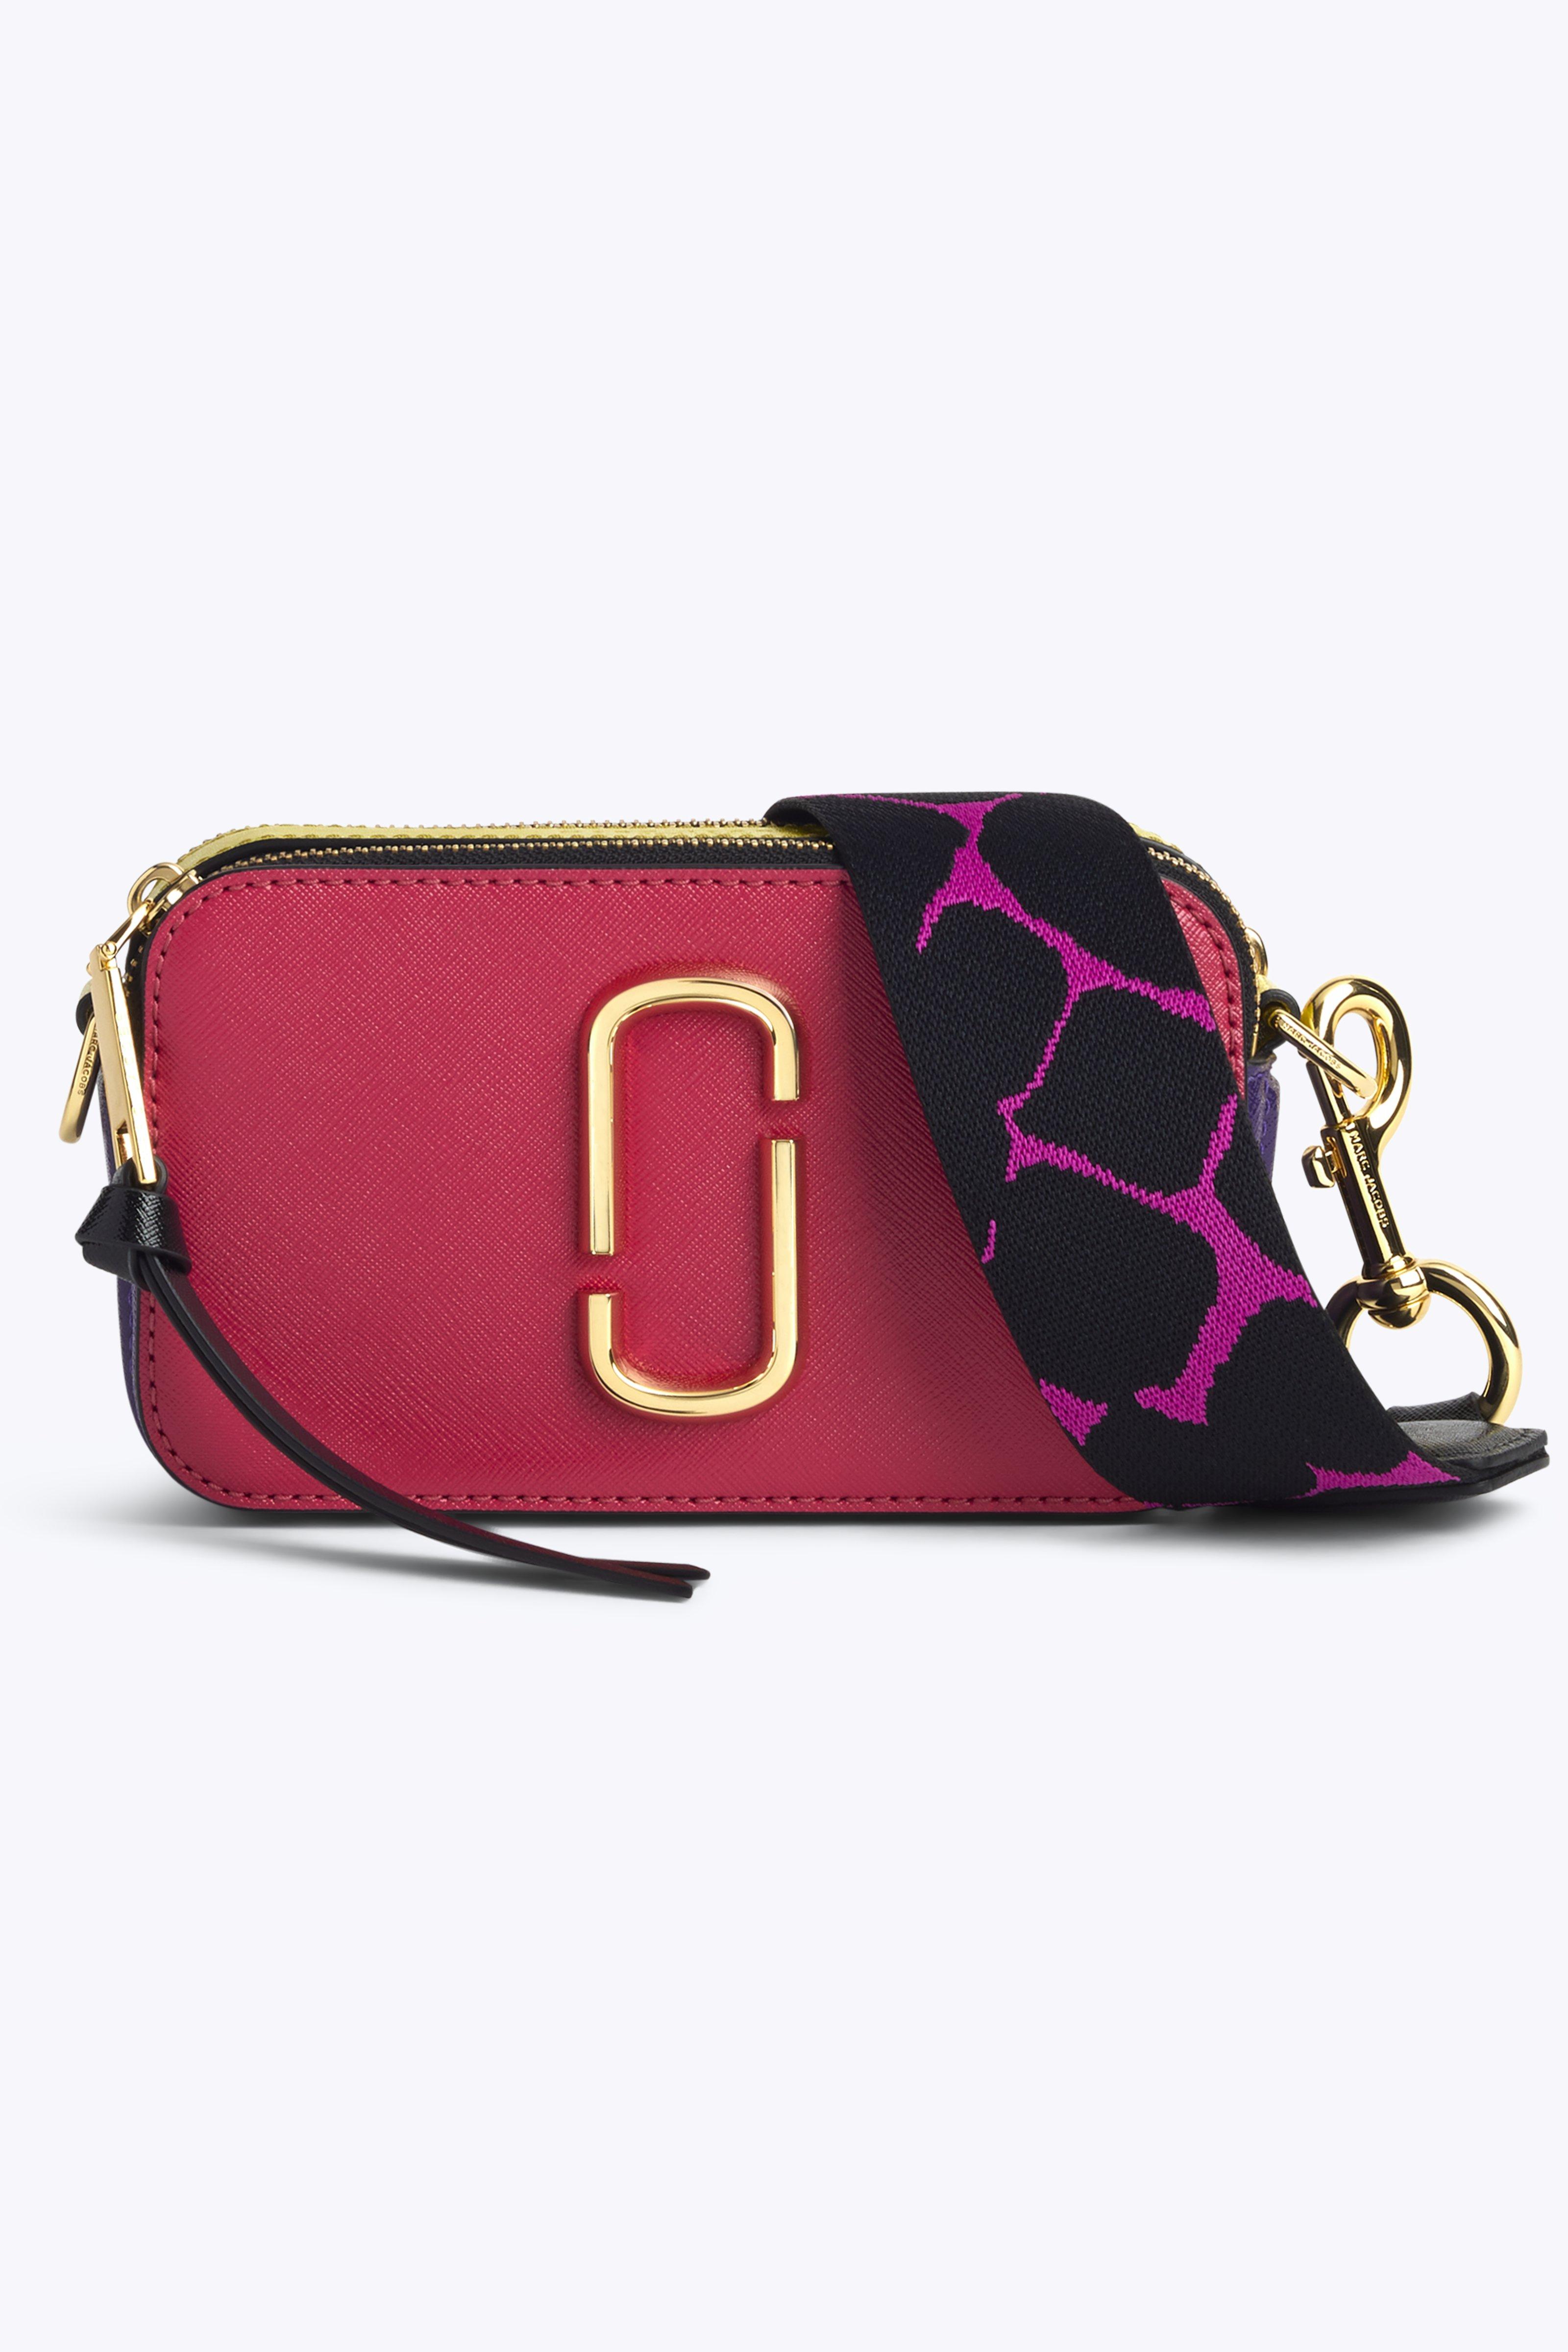 [Marc Jacobs] The snapshot camera cross bag M0012007 Free Gifts 